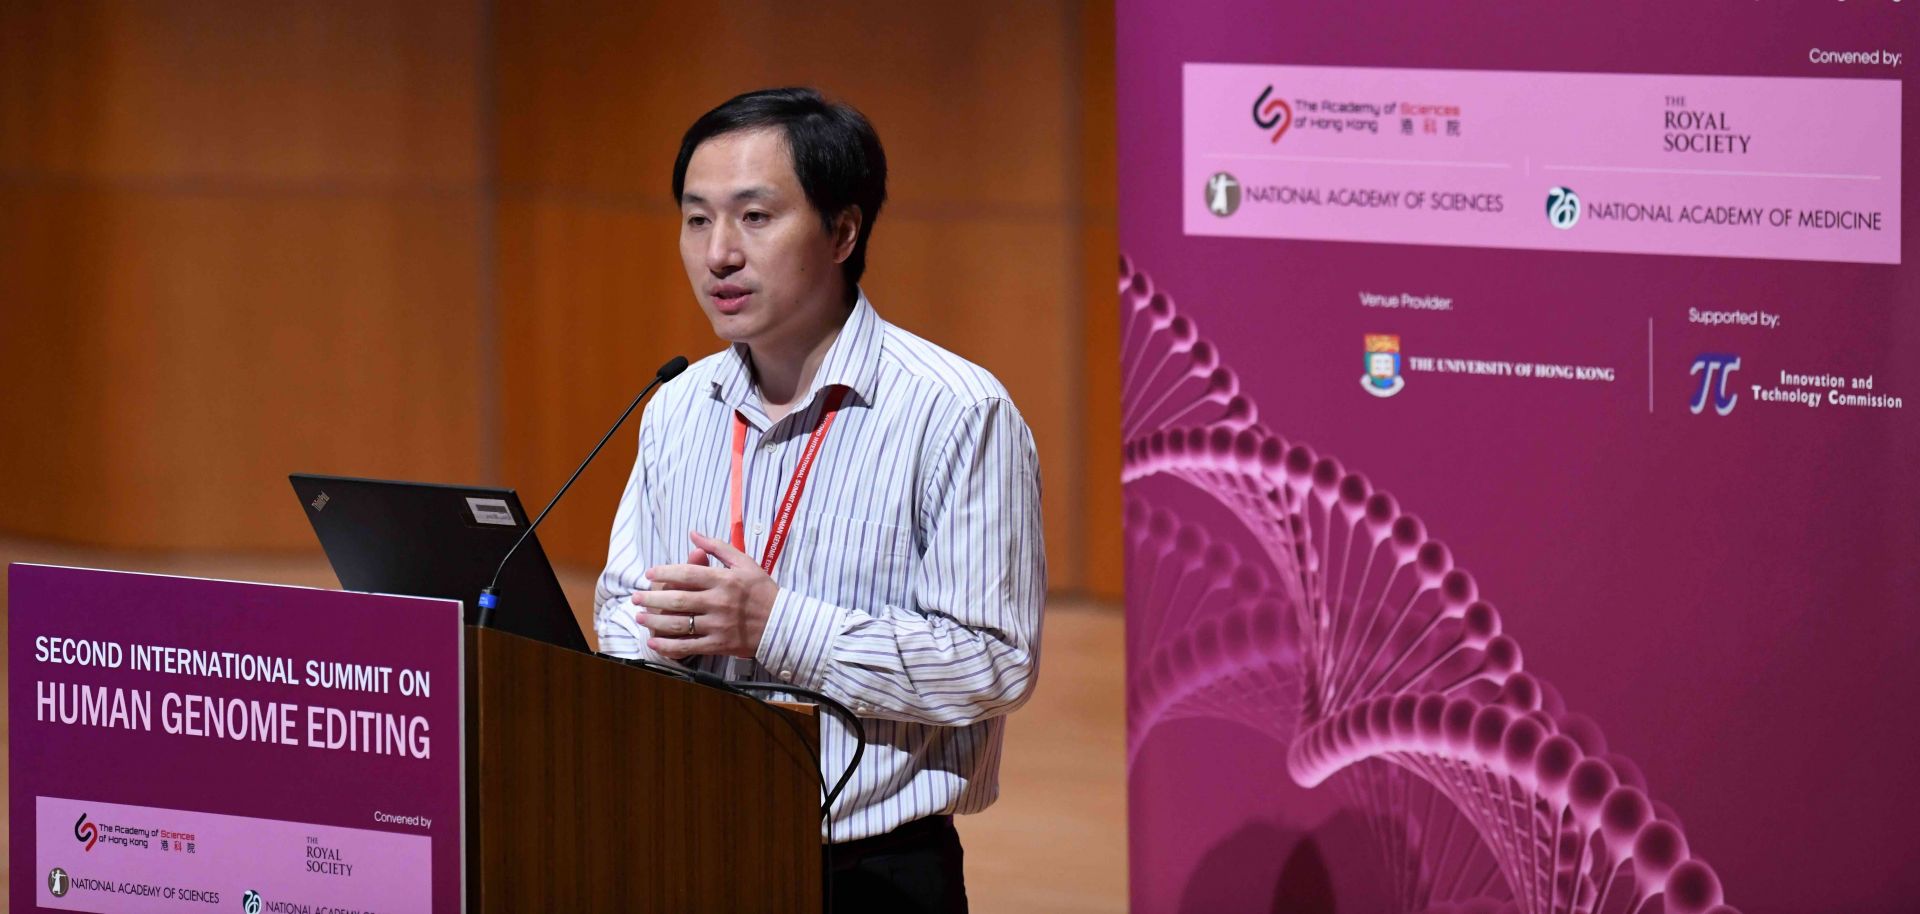 Chinese scientist He Jiankui speaks at the Second International Summit on Human Genome Editing in Hong Kong on Nov. 28, 2018.